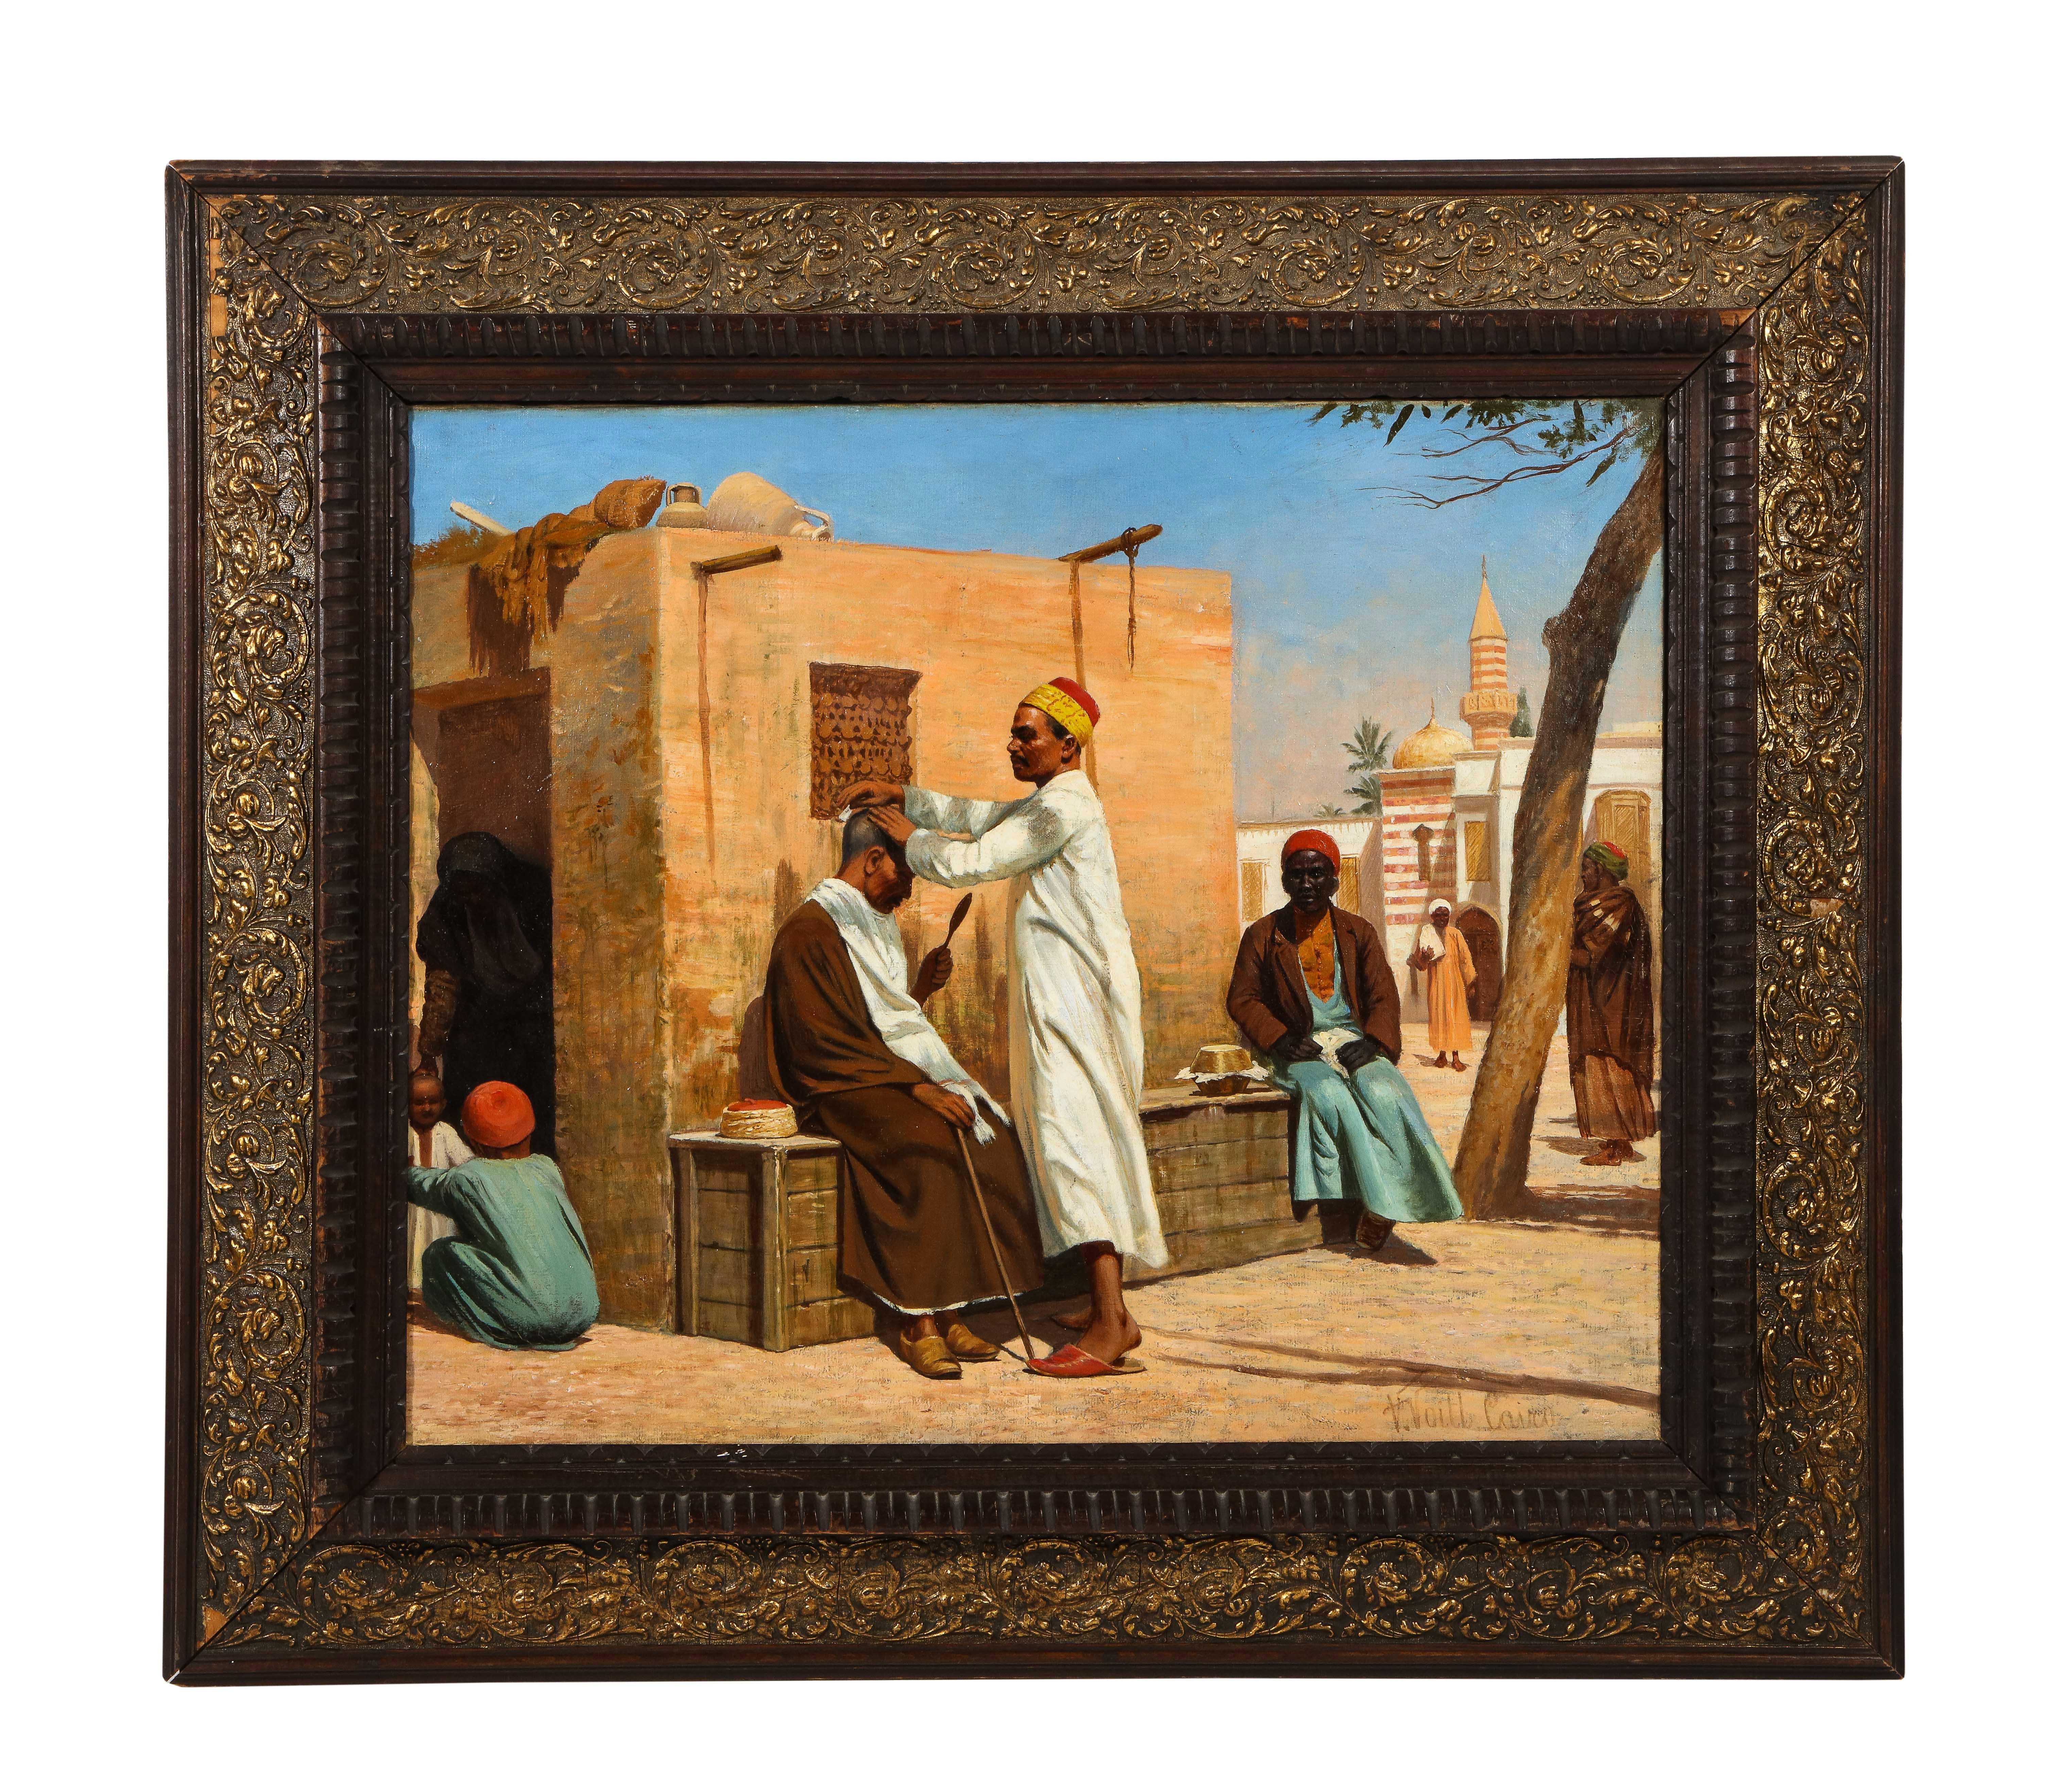 Unknown Portrait Painting - An Exceptional Orientalist Oil Painting "The Barber", Cairo (19th Century) 